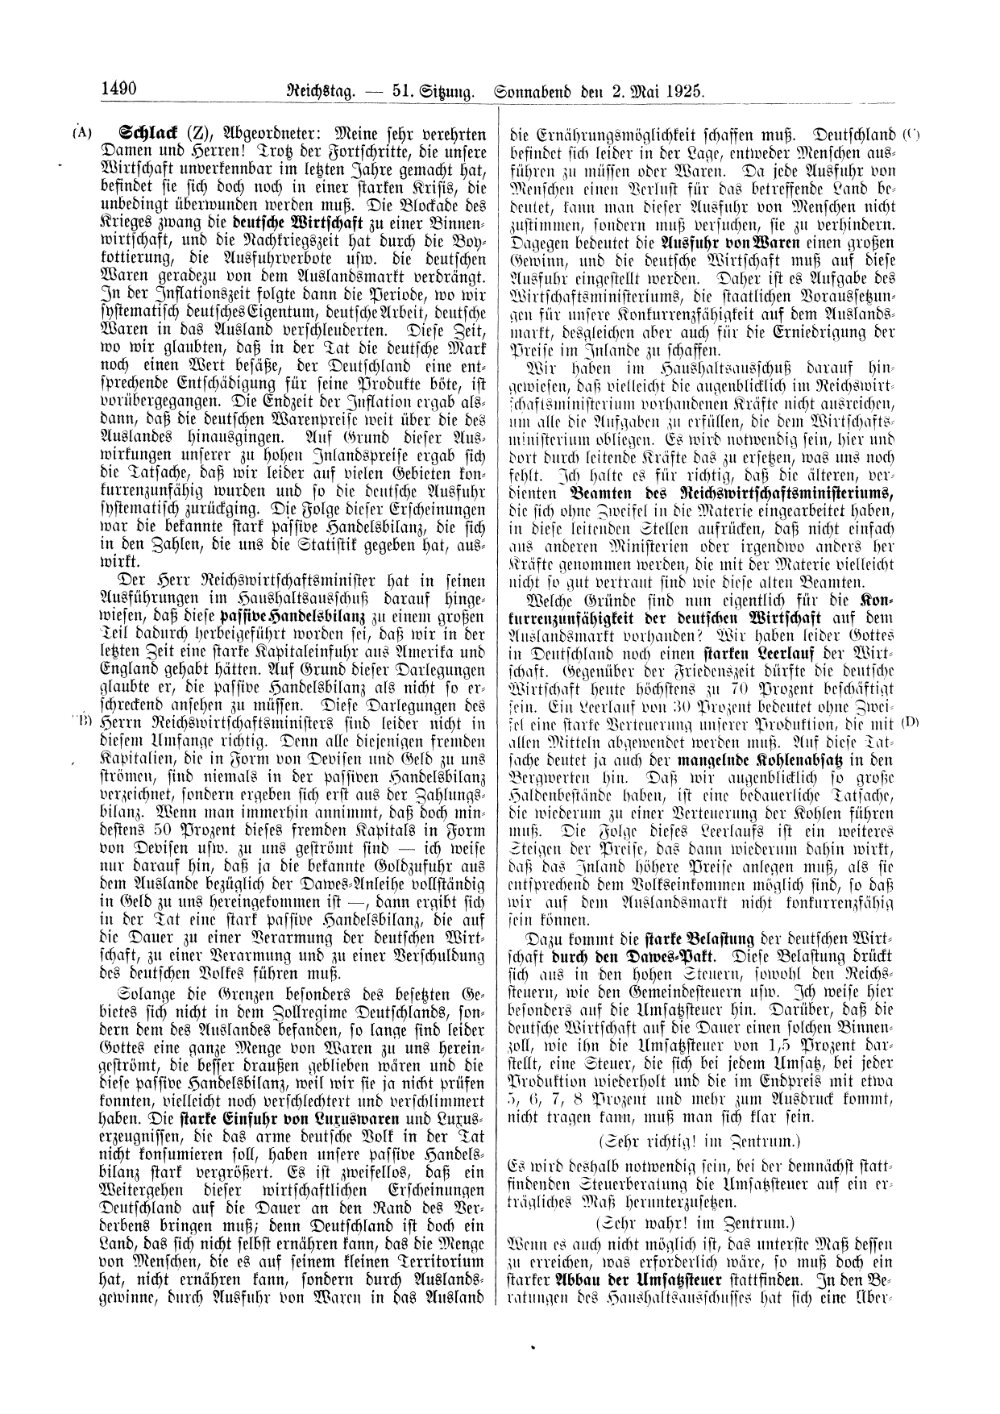 Scan of page 1490